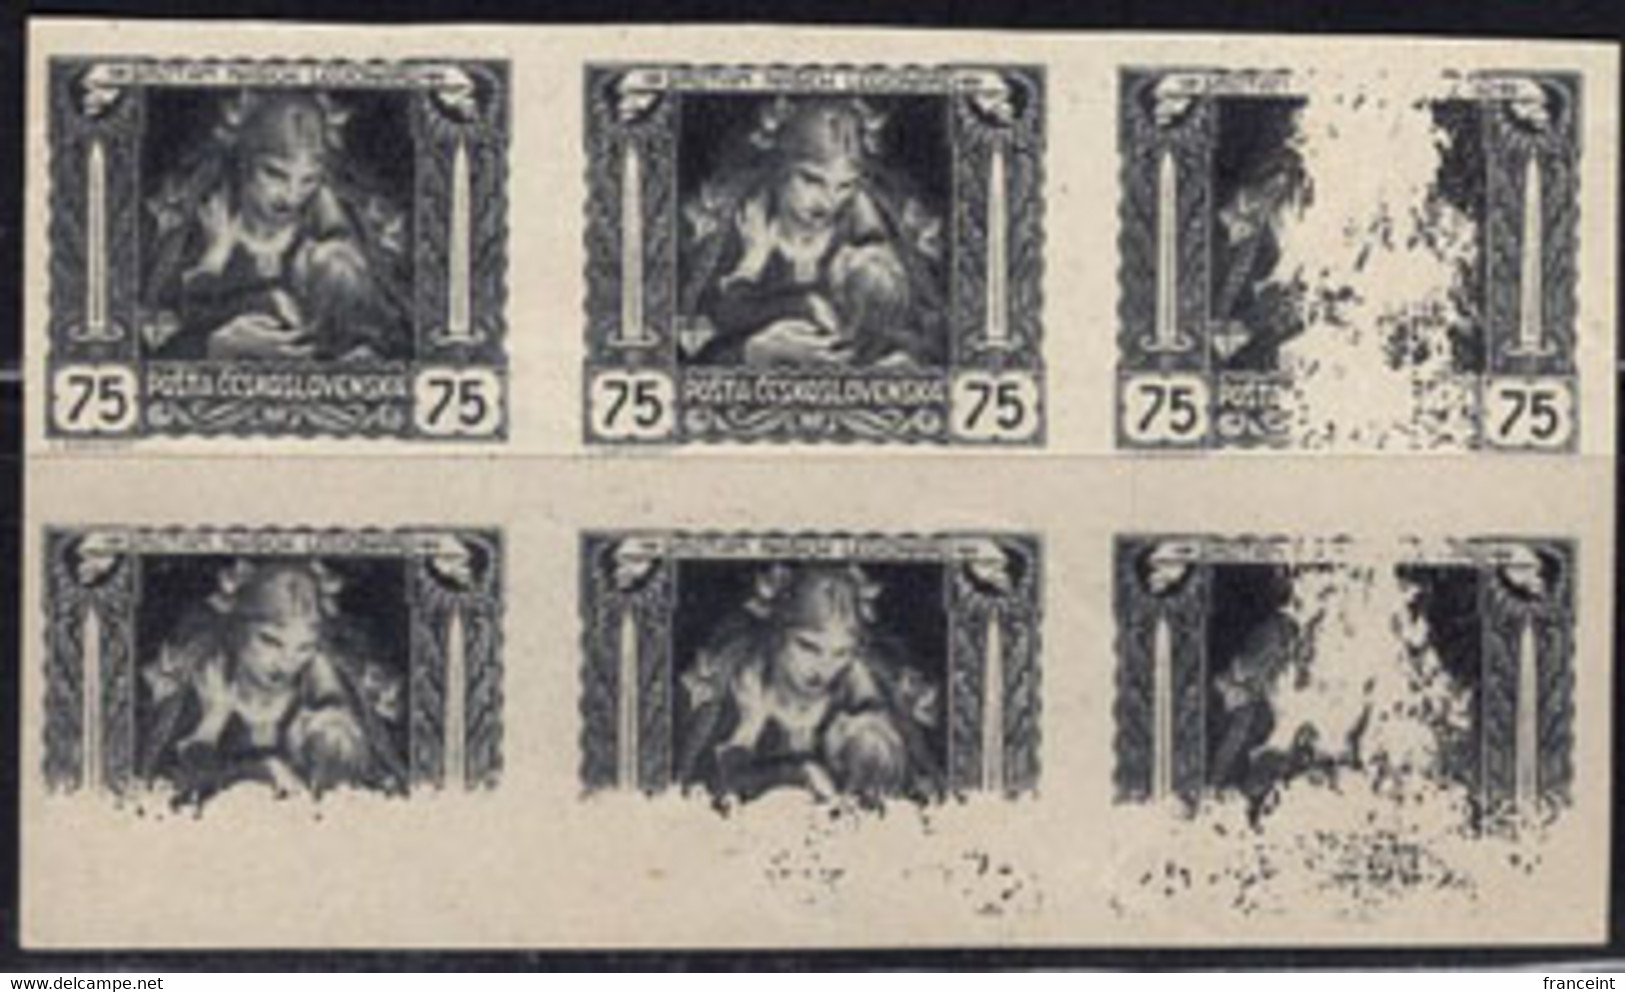 CZECHOSLOVAKIA(1919) Mother And Child. Block Of 6 Imperforate Proofs Printed On White Paper. Scott No B127. - Probe- Und Nachdrucke